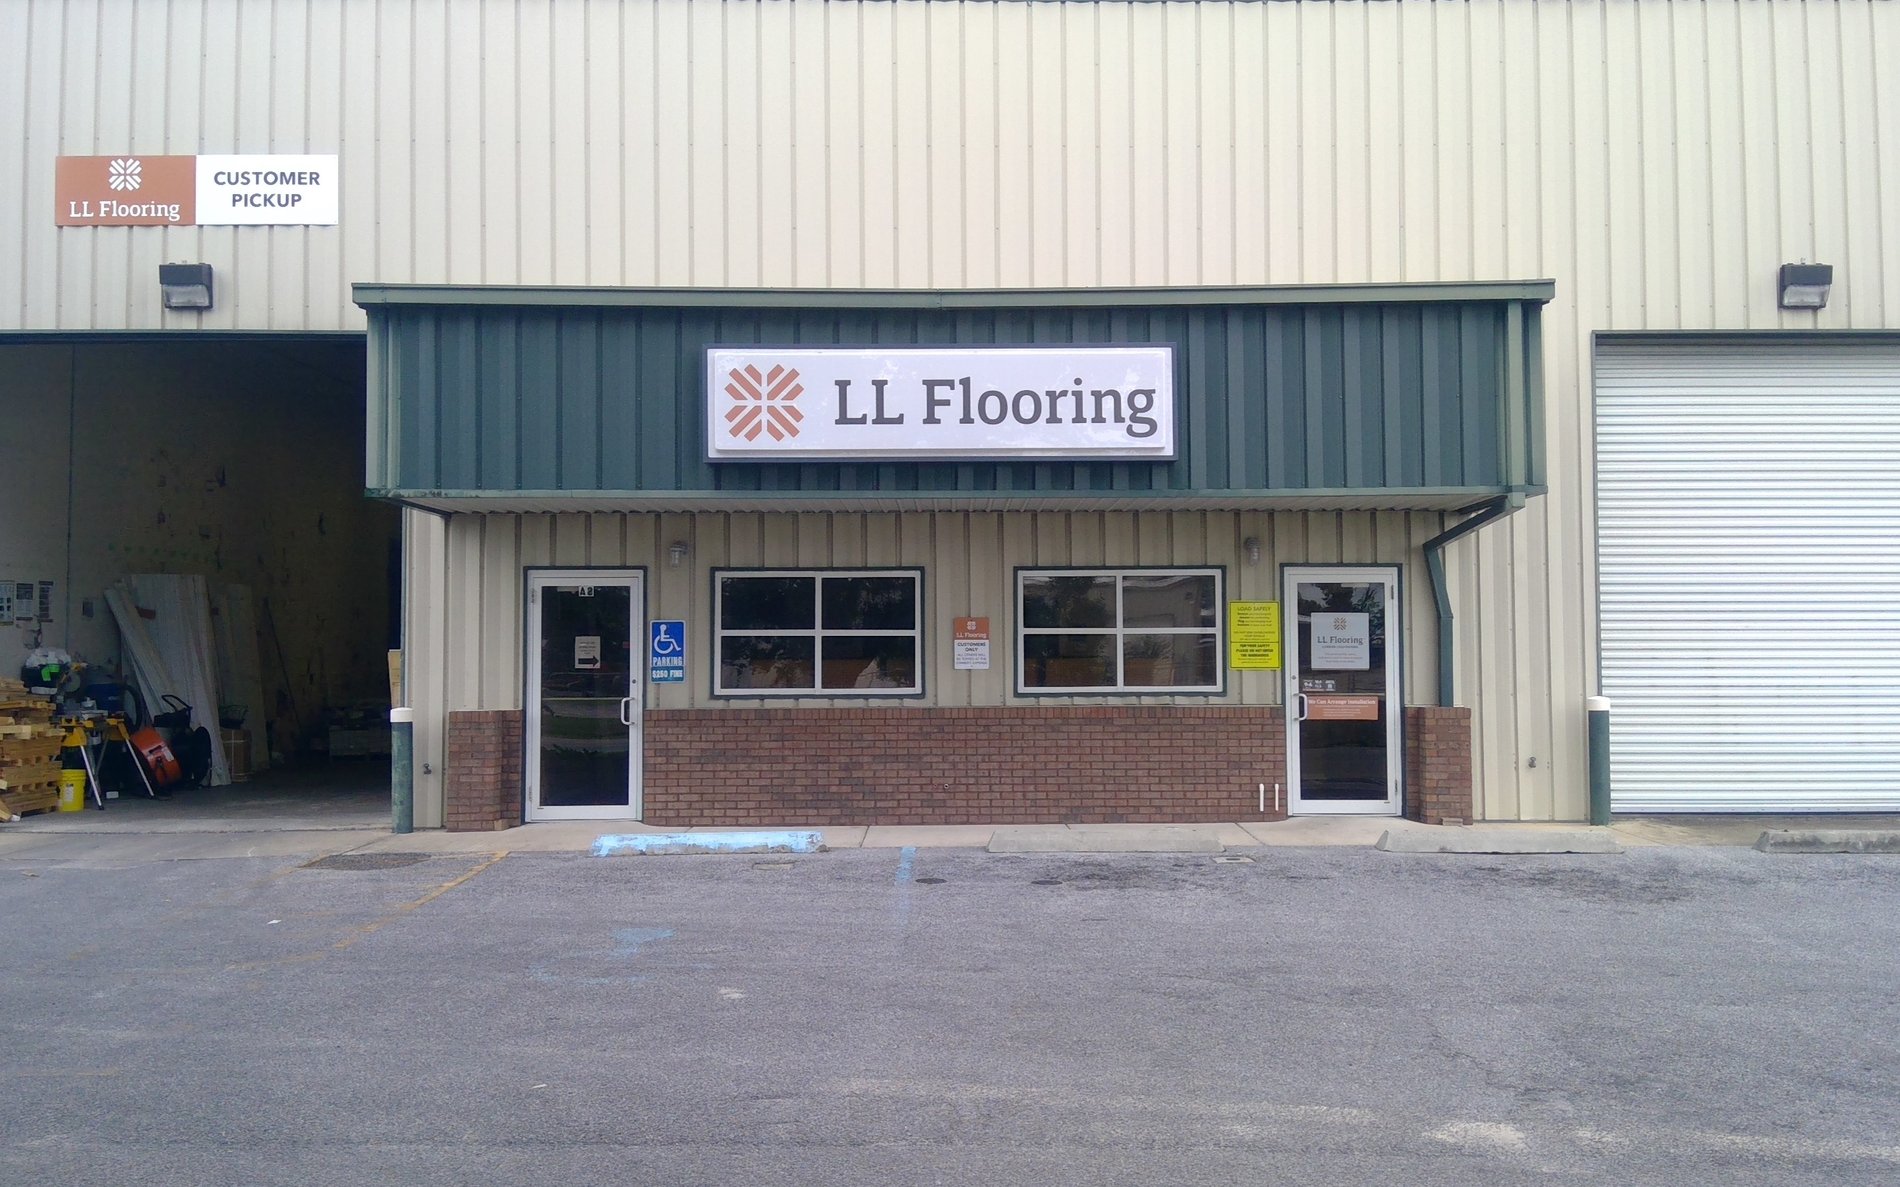 LL Flooring #1143 Panama City | 901 N. East Ave. | Storefront